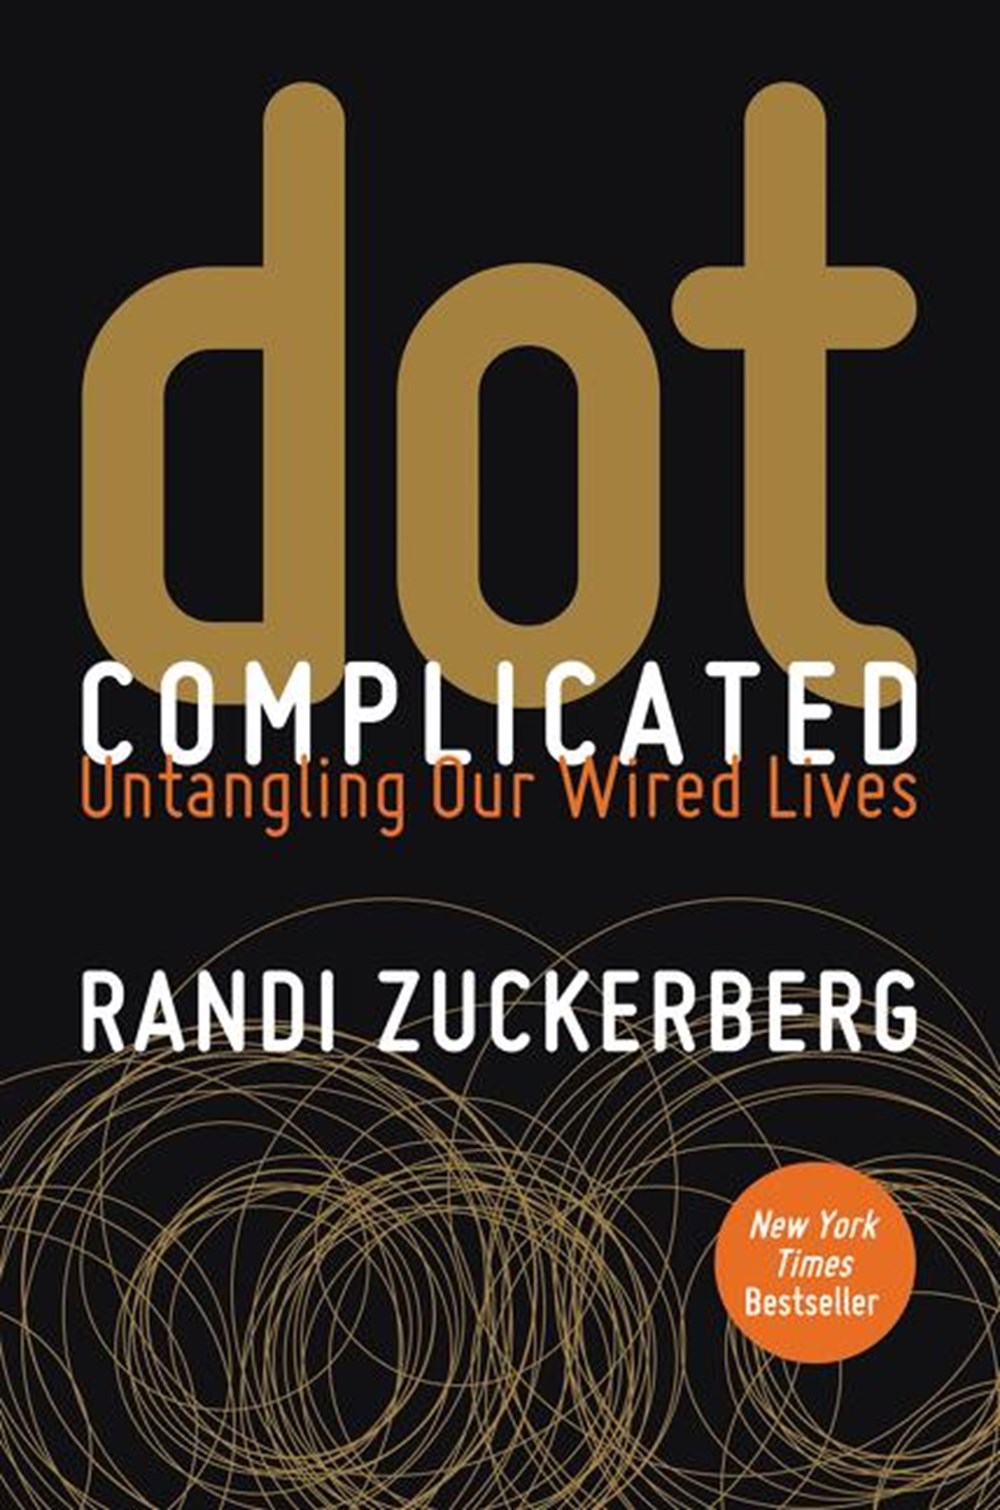 dot Complicated Untangling Our Wired Lives